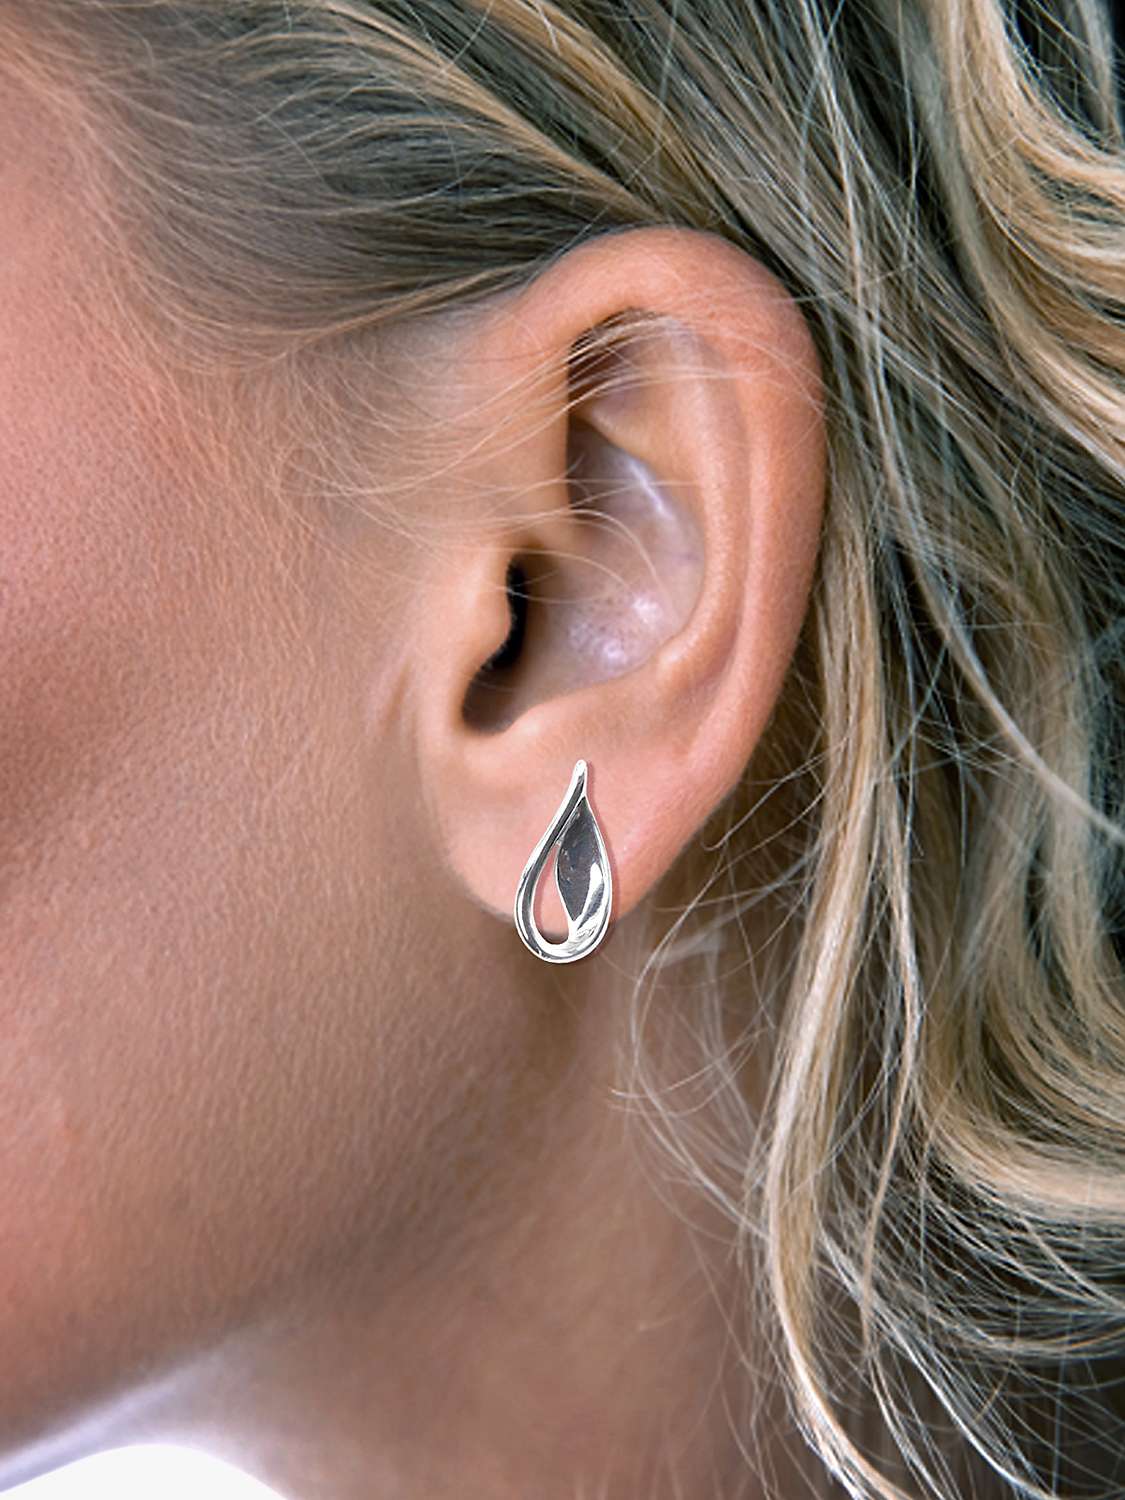 Buy Nina B Small Polished Open Drop Stud Earrings, Silver Online at johnlewis.com